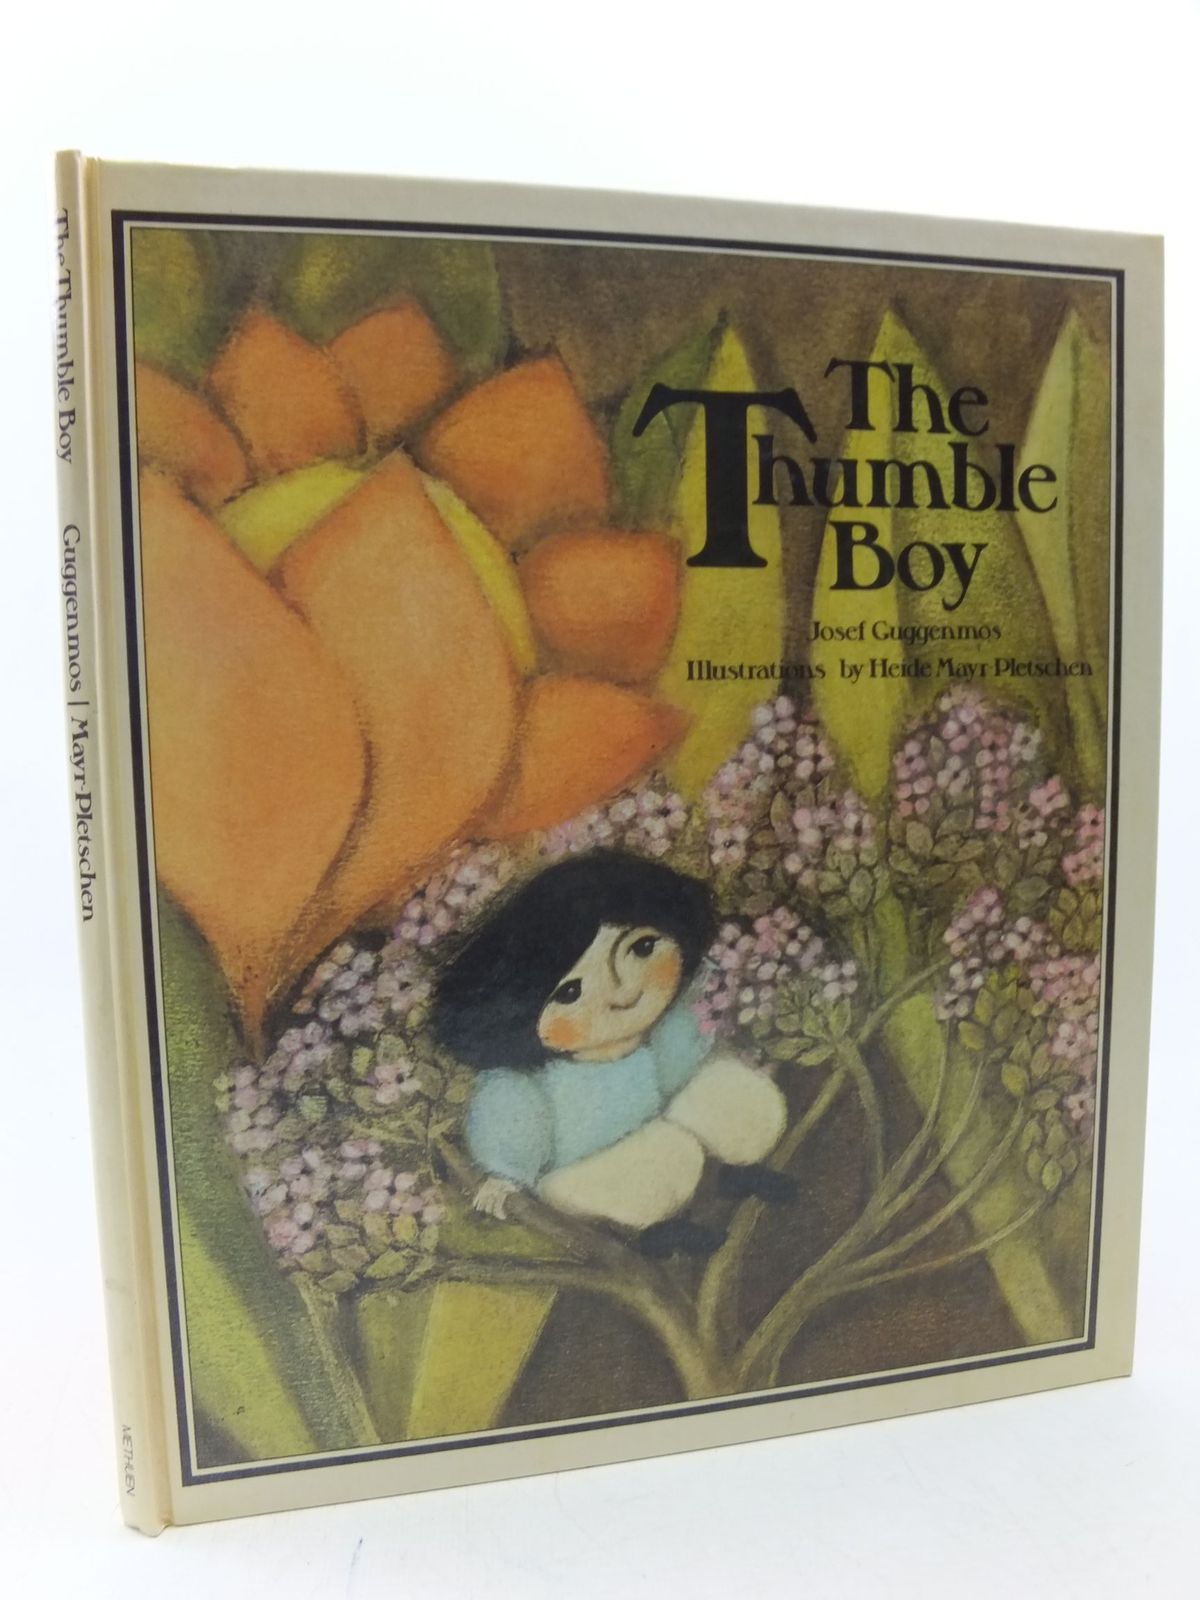 Photo of THE THUMBLE BOY written by Guggenmos, Josef Jones, Olive illustrated by Mayr-Pletschen, Heide published by Methuen Children's Books (STOCK CODE: 2112888)  for sale by Stella & Rose's Books